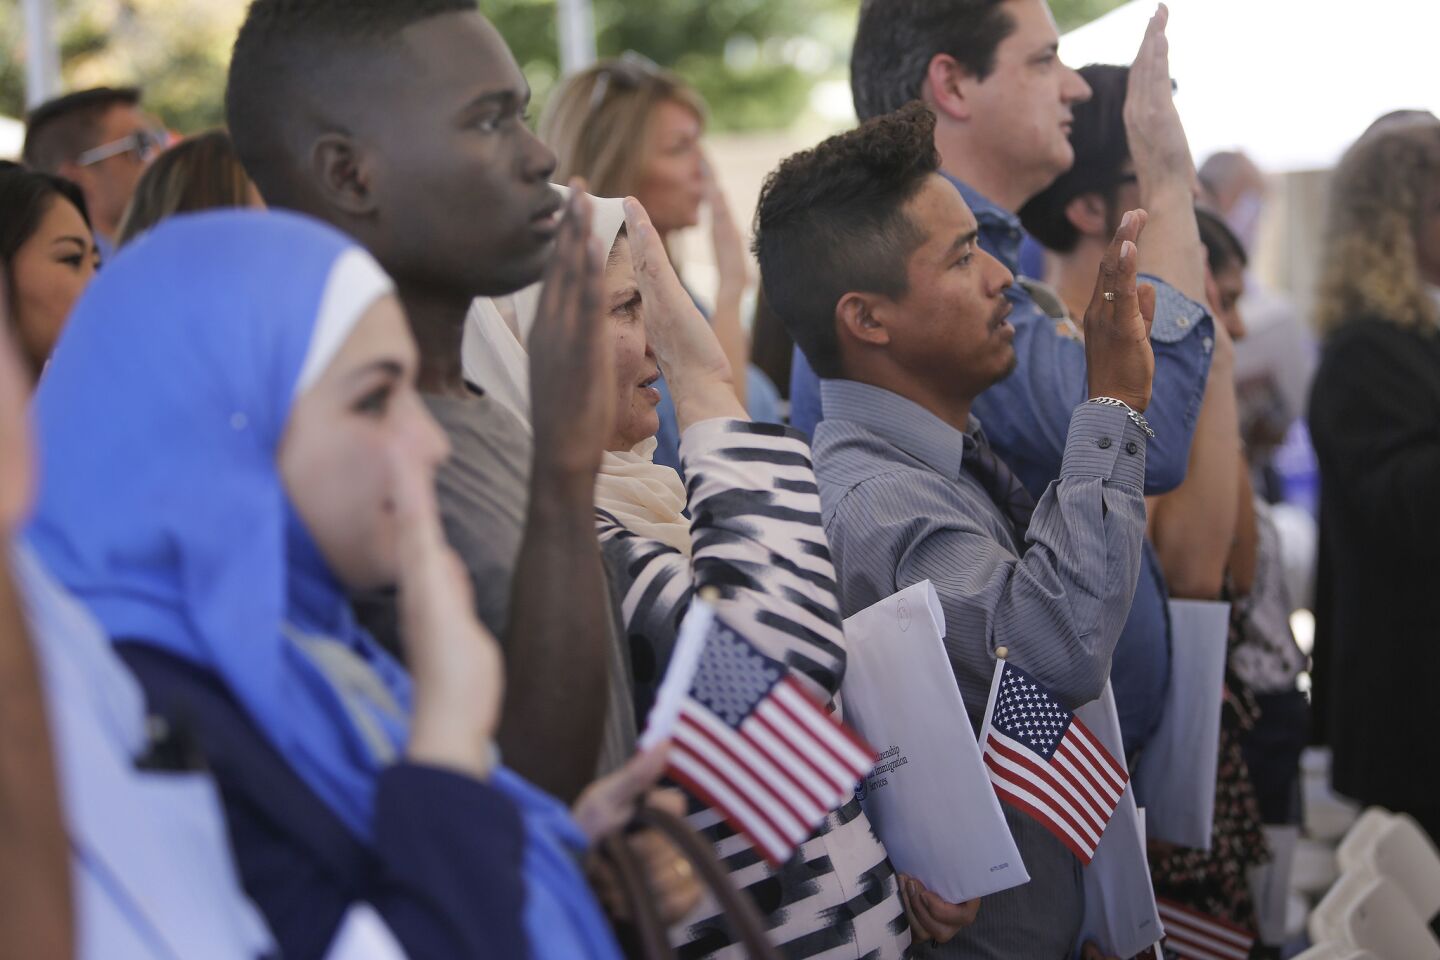 County's newest U.S. citizens